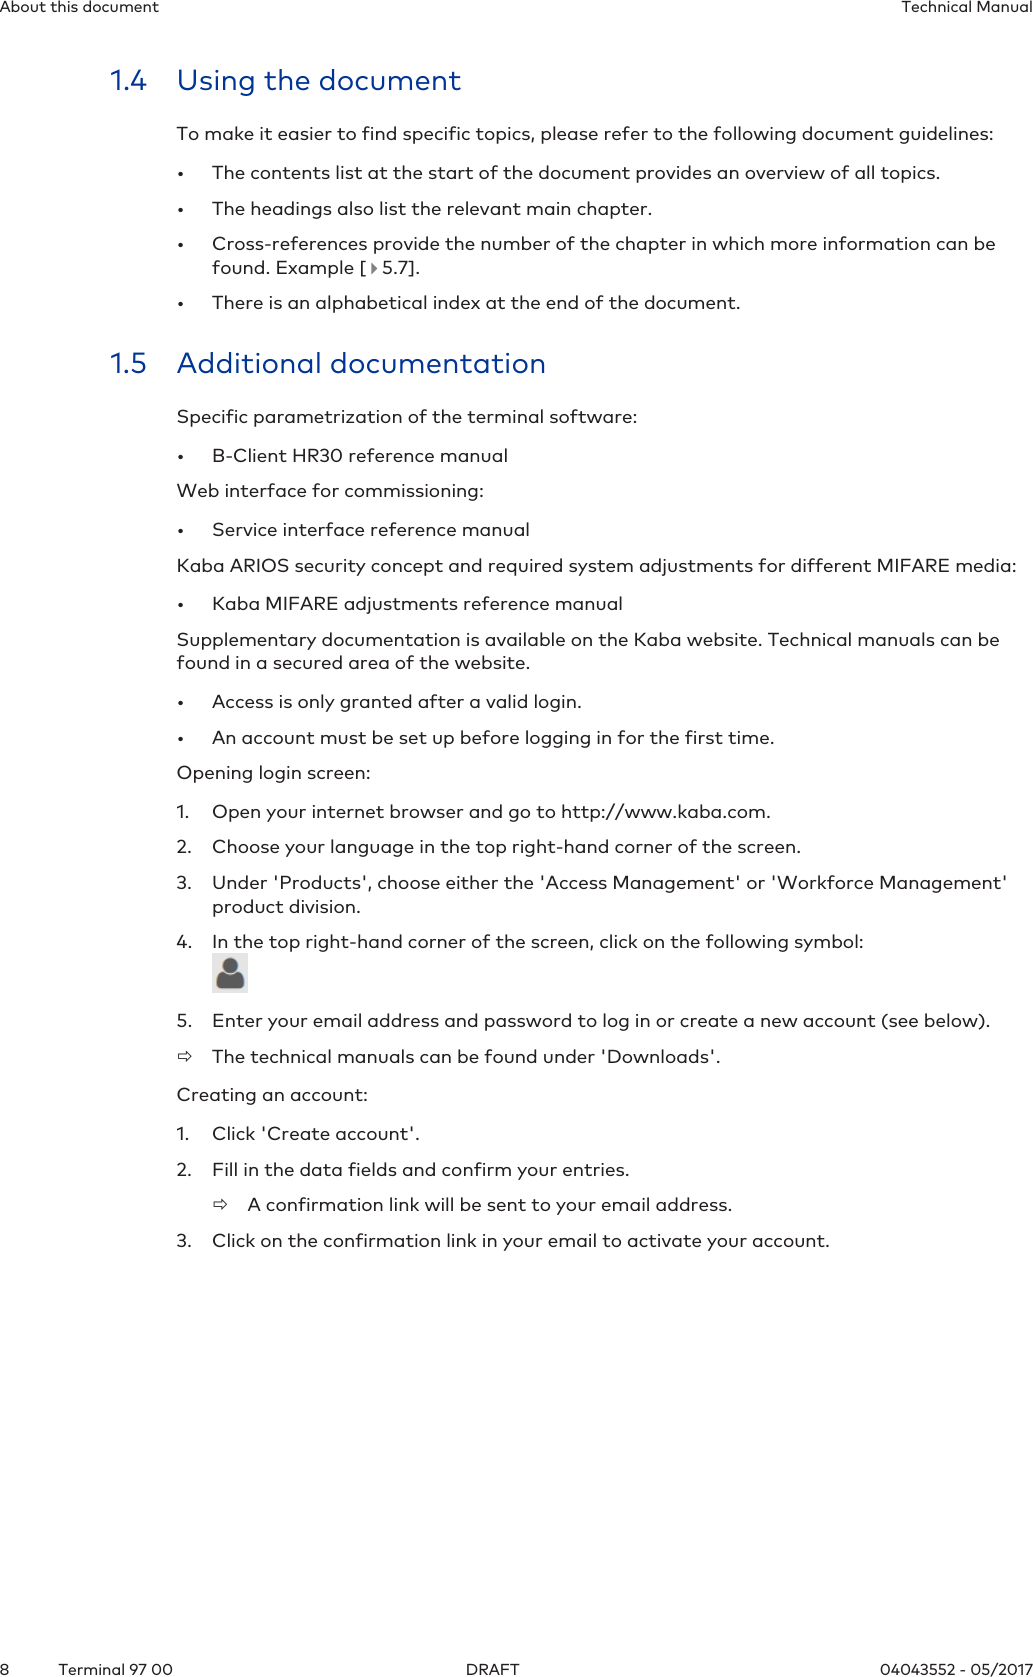 About this document Technical Manual8 04043552 - 05/2017Terminal 97 00 DRAFT1.4 Using the documentTo make it easier to find specific topics, please refer to the following document guidelines:• The contents list at the start of the document provides an overview of all topics.• The headings also list the relevant main chapter.• Cross-references provide the number of the chapter in which more information can befound. Example [   5.7].• There is an alphabetical index at the end of the document.1.5 Additional documentationSpecific parametrization of the terminal software:• B-Client HR30 reference manualWeb interface for commissioning:• Service interface reference manualKaba ARIOS security concept and required system adjustments for different MIFARE media:• Kaba MIFARE adjustments reference manualSupplementary documentation is available on the Kaba website. Technical manuals can befound in a secured area of the website.• Access is only granted after a valid login.• An account must be set up before logging in for the first time.Opening login screen:1. Open your internet browser and go to http://www.kaba.com.2. Choose your language in the top right-hand corner of the screen.3. Under &apos;Products&apos;, choose either the &apos;Access Management&apos; or &apos;Workforce Management&apos;product division.4. In the top right-hand corner of the screen, click on the following symbol:5. Enter your email address and password to log in or create a new account (see below).ðThe technical manuals can be found under &apos;Downloads&apos;.Creating an account:1. Click &apos;Create account&apos;.2. Fill in the data fields and confirm your entries.ðA confirmation link will be sent to your email address.3. Click on the confirmation link in your email to activate your account.